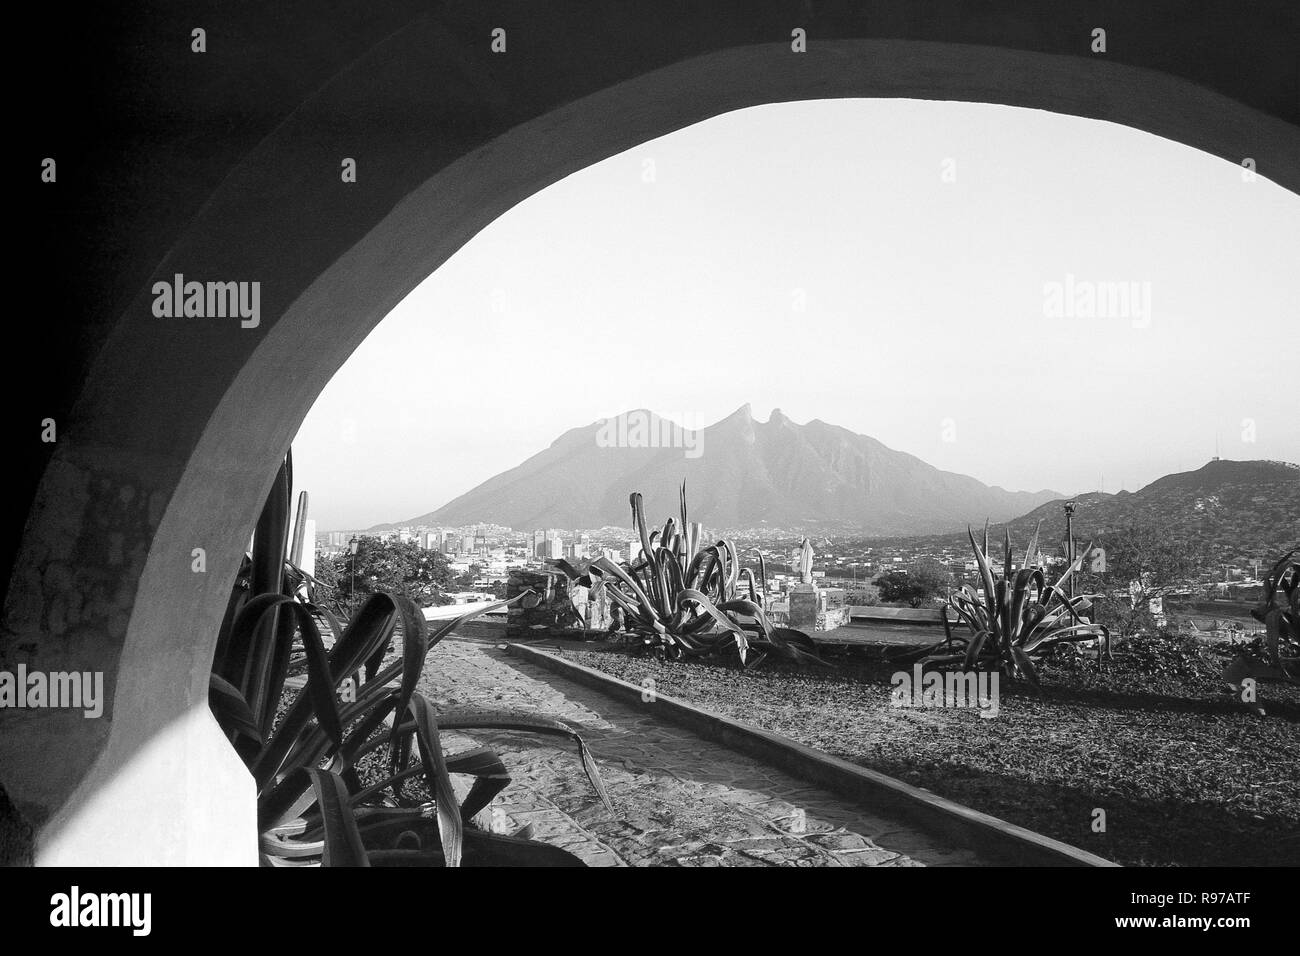 MONTERREY, NL/MEXICO - NOV 20, 2002: View from the Bishop's museum, La Silla hill framed by the arch Stock Photo